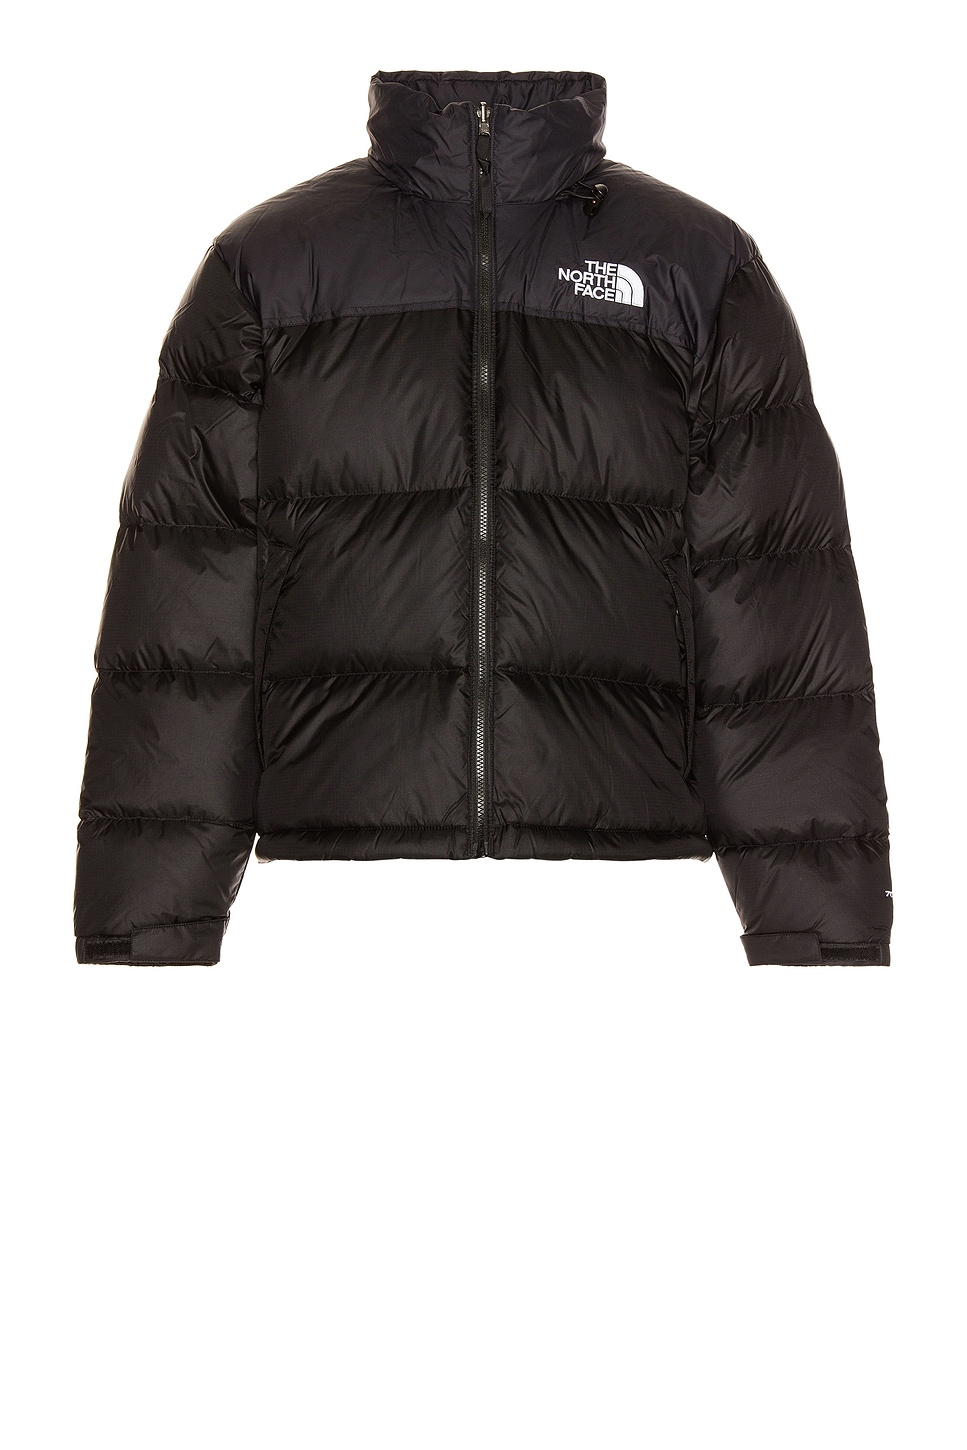 Image 1 of The North Face 1996 Retro Nuptse Jacket in Recycled TNF Black